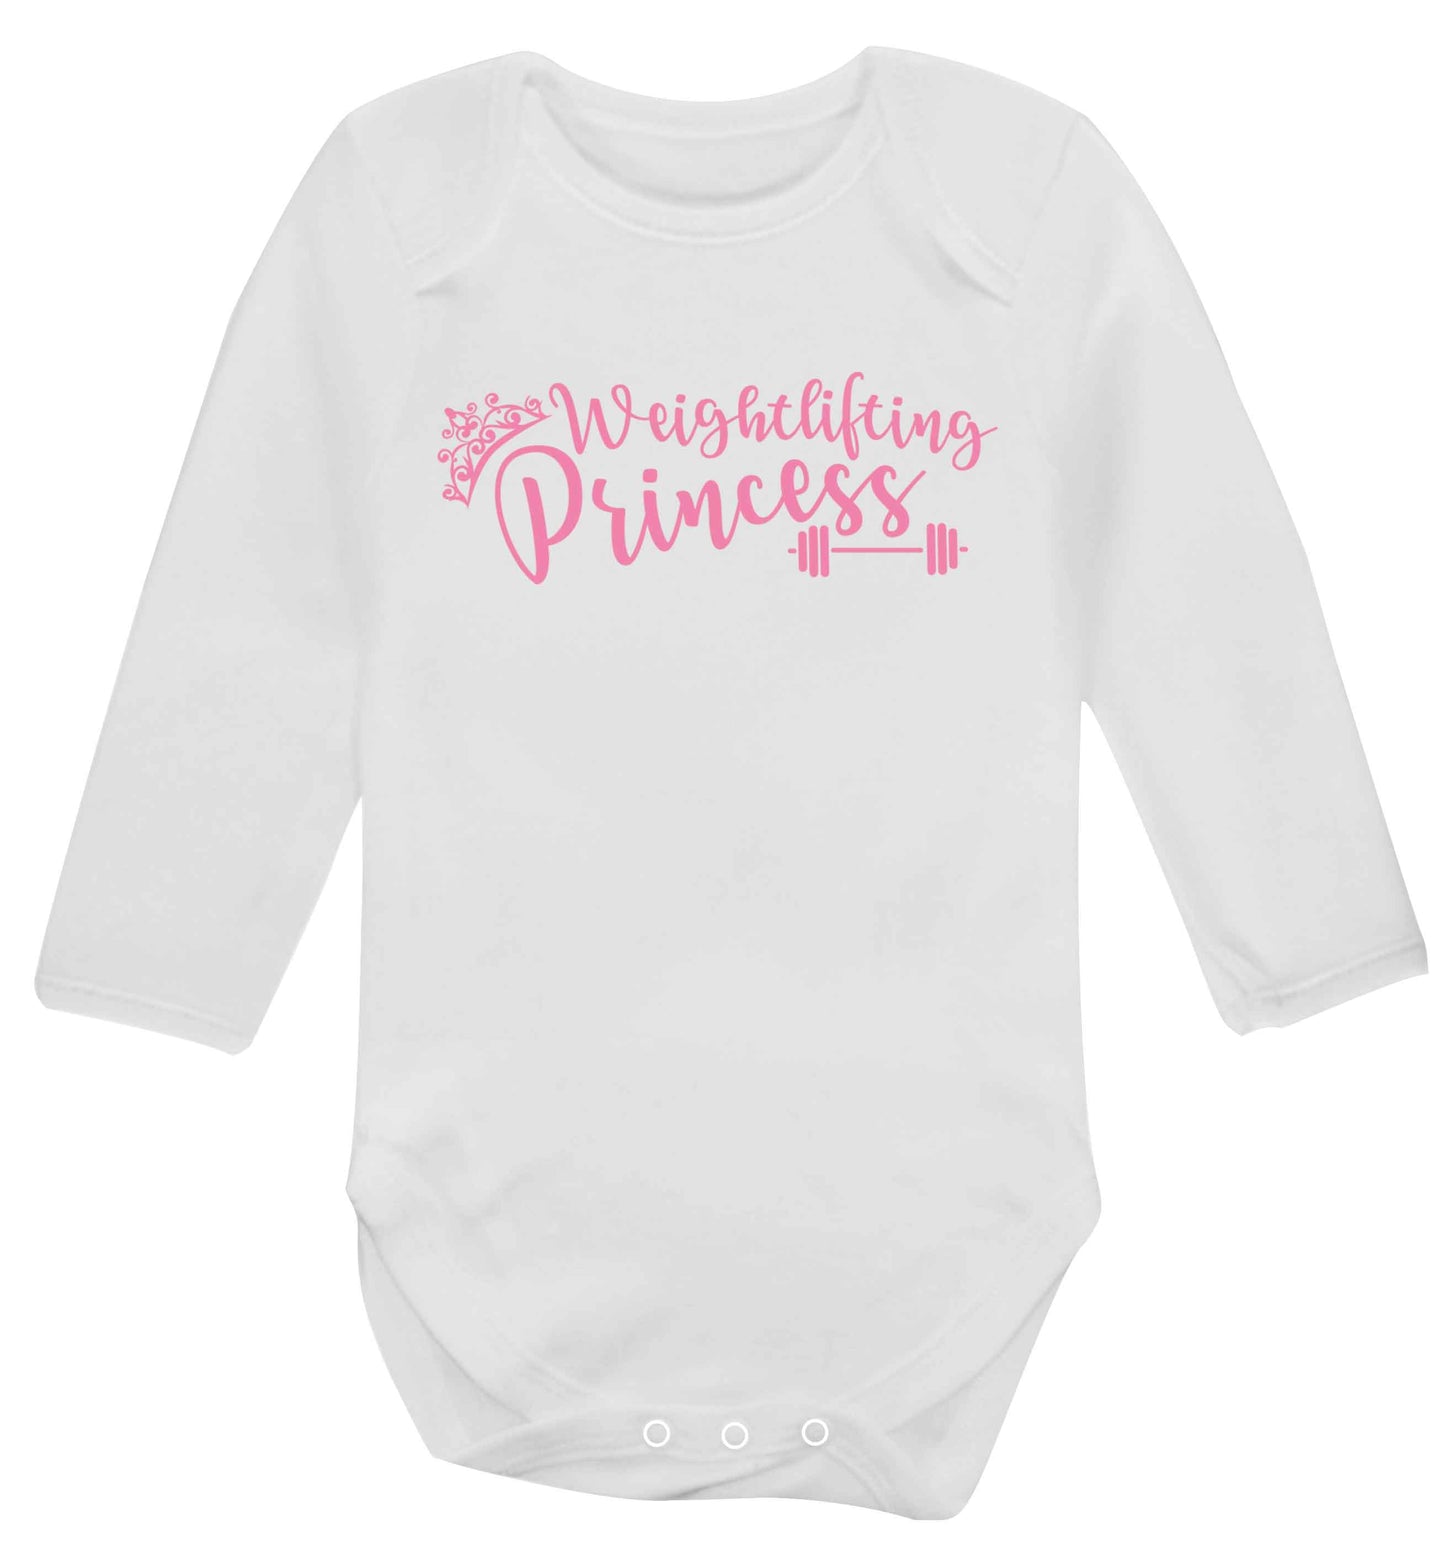 Weightlifting princess Baby Vest long sleeved white 6-12 months